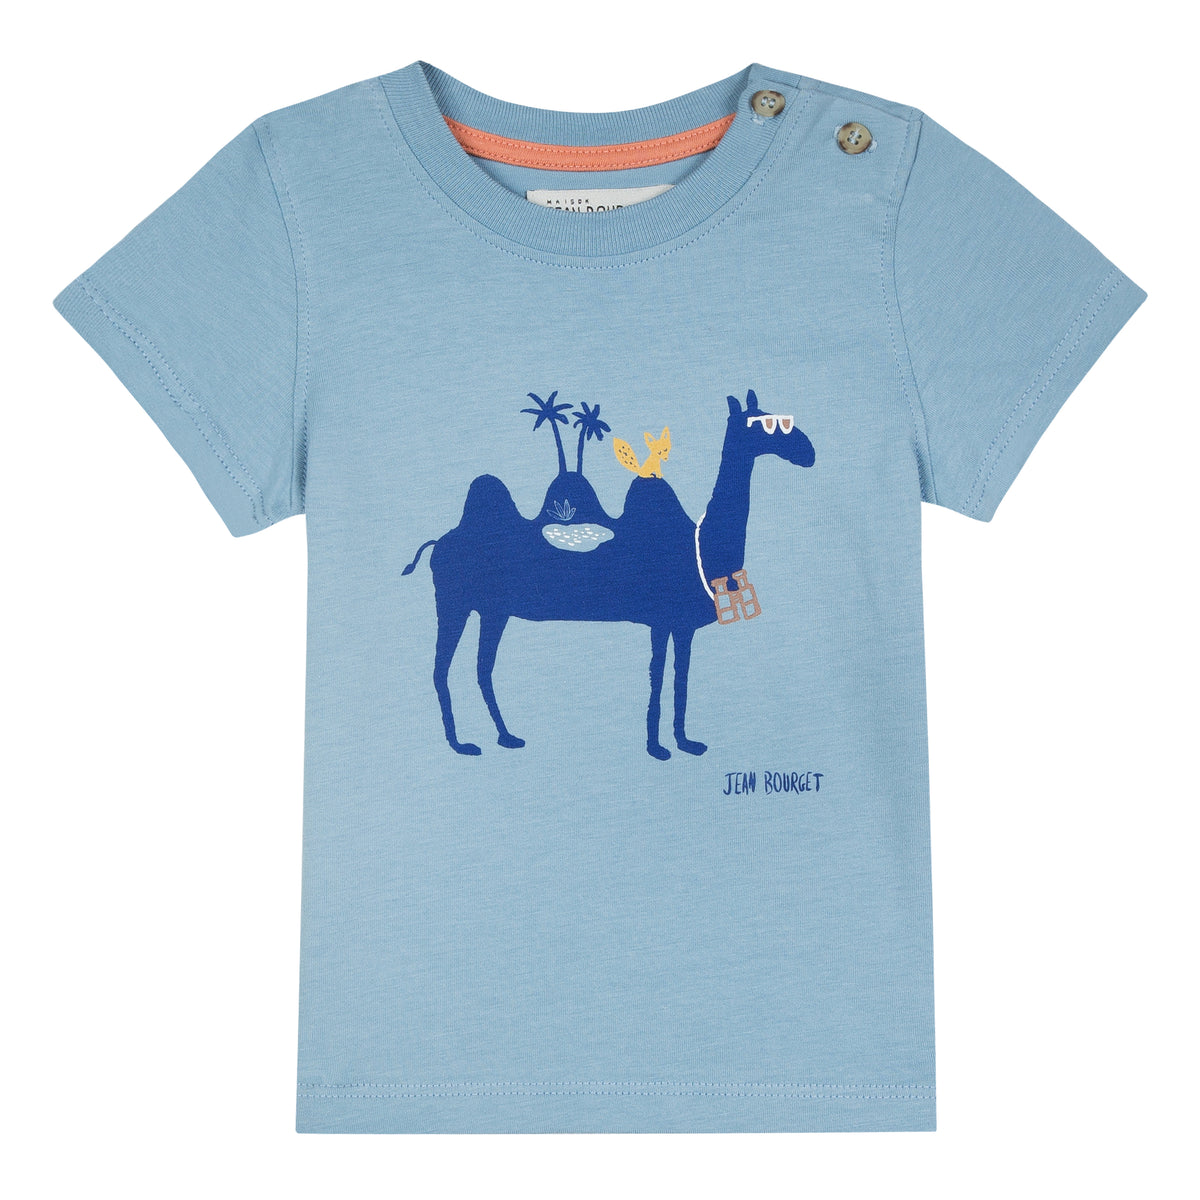 Blue cotton jersey t-shirt printed with a camel adorned with glasses on the front. Two buttons placed on the left shoulder. By Jean Bourget.